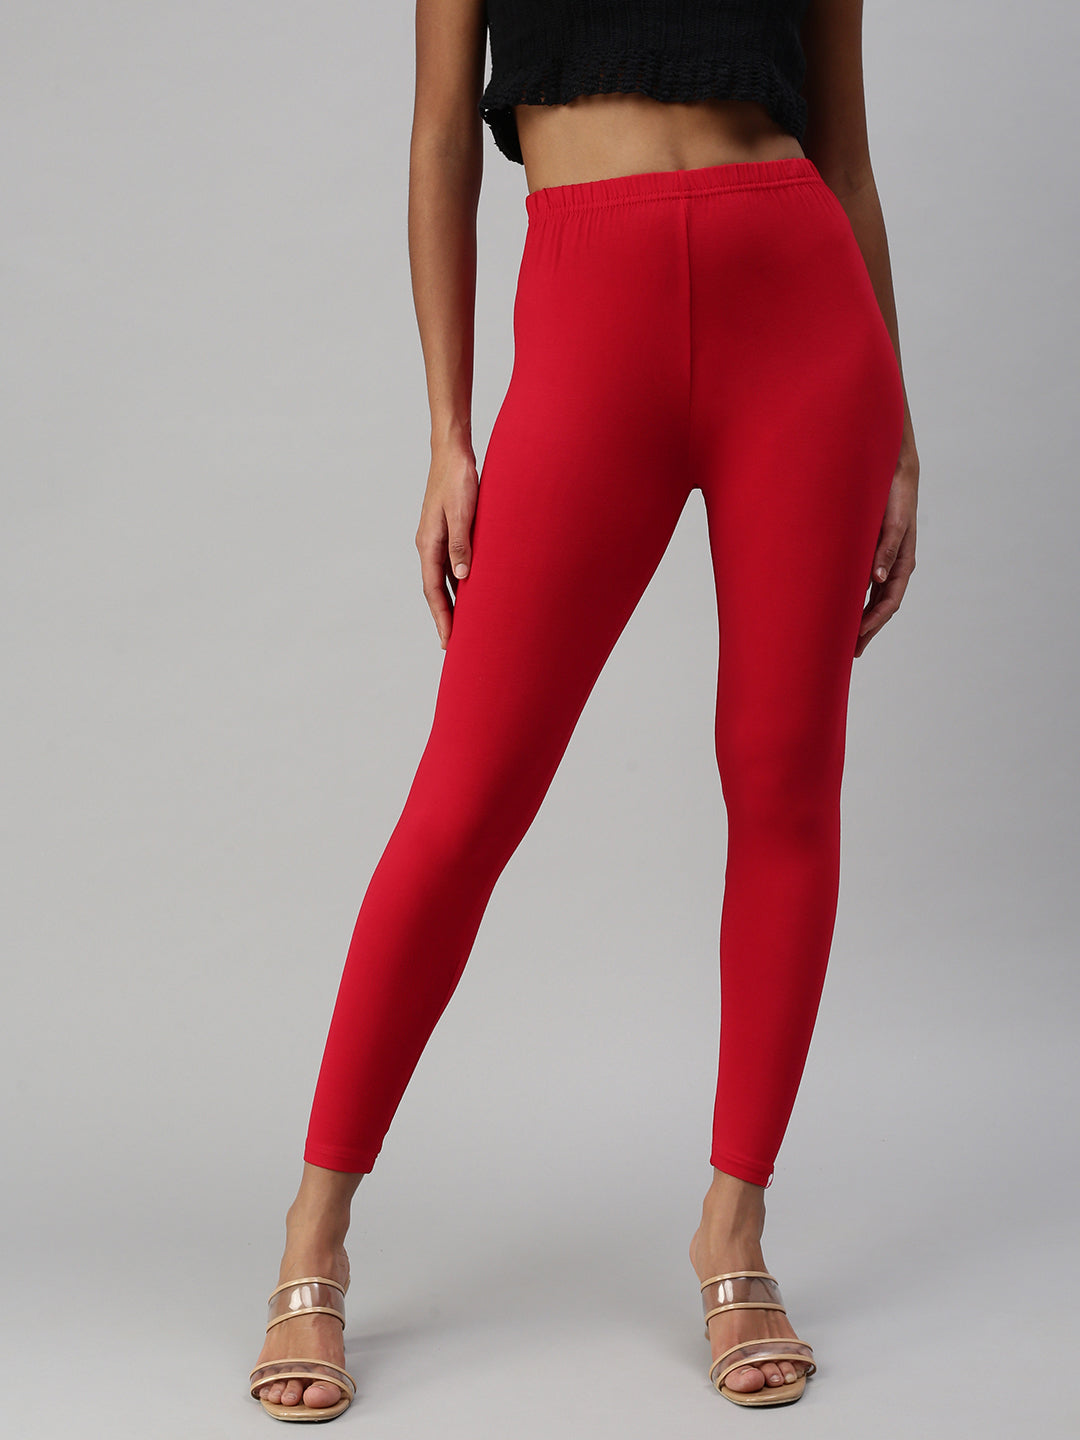 Buy prisma leggings for womens in India @ Limeroad